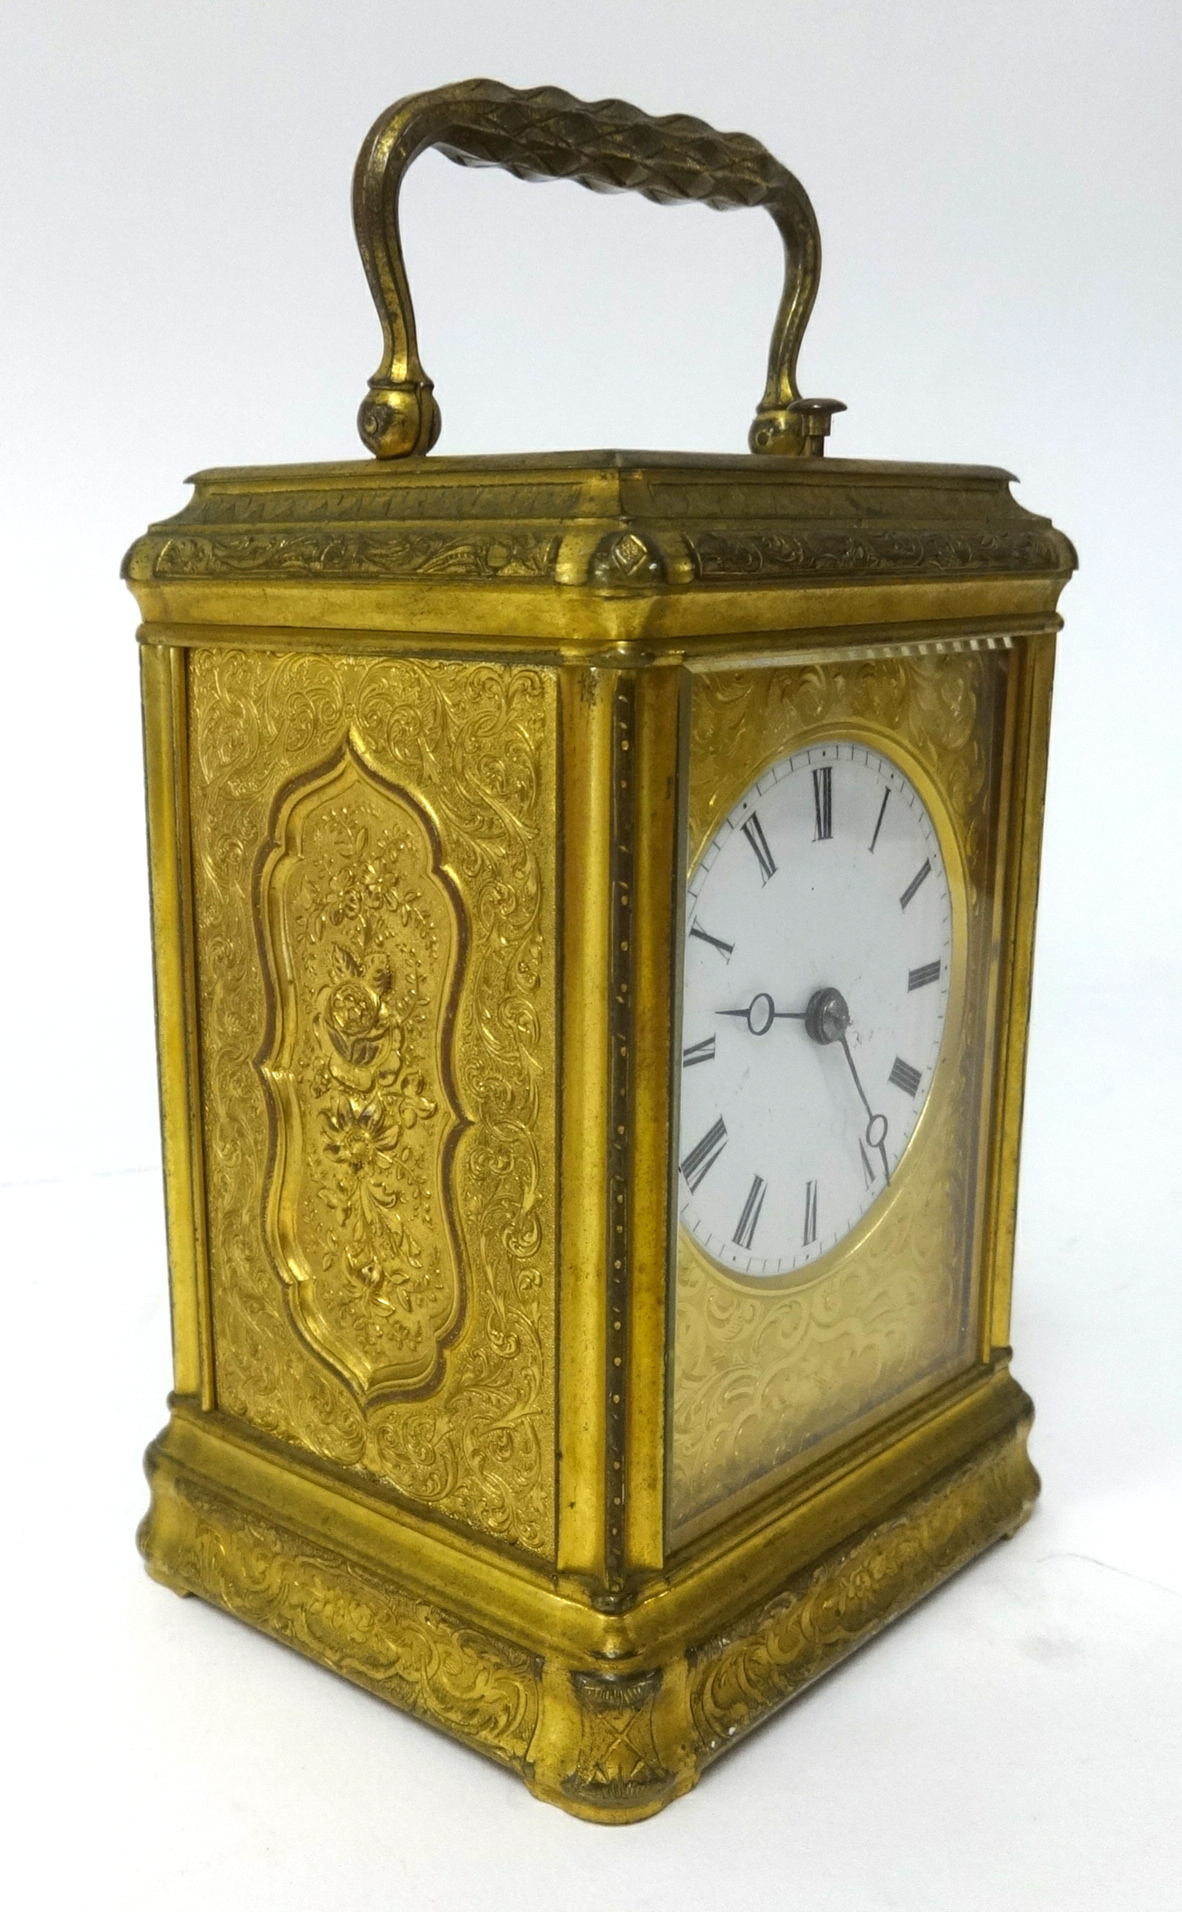 A 19th century gilt brass cased repeater carriage clock, key wind from back with platform - Image 2 of 4